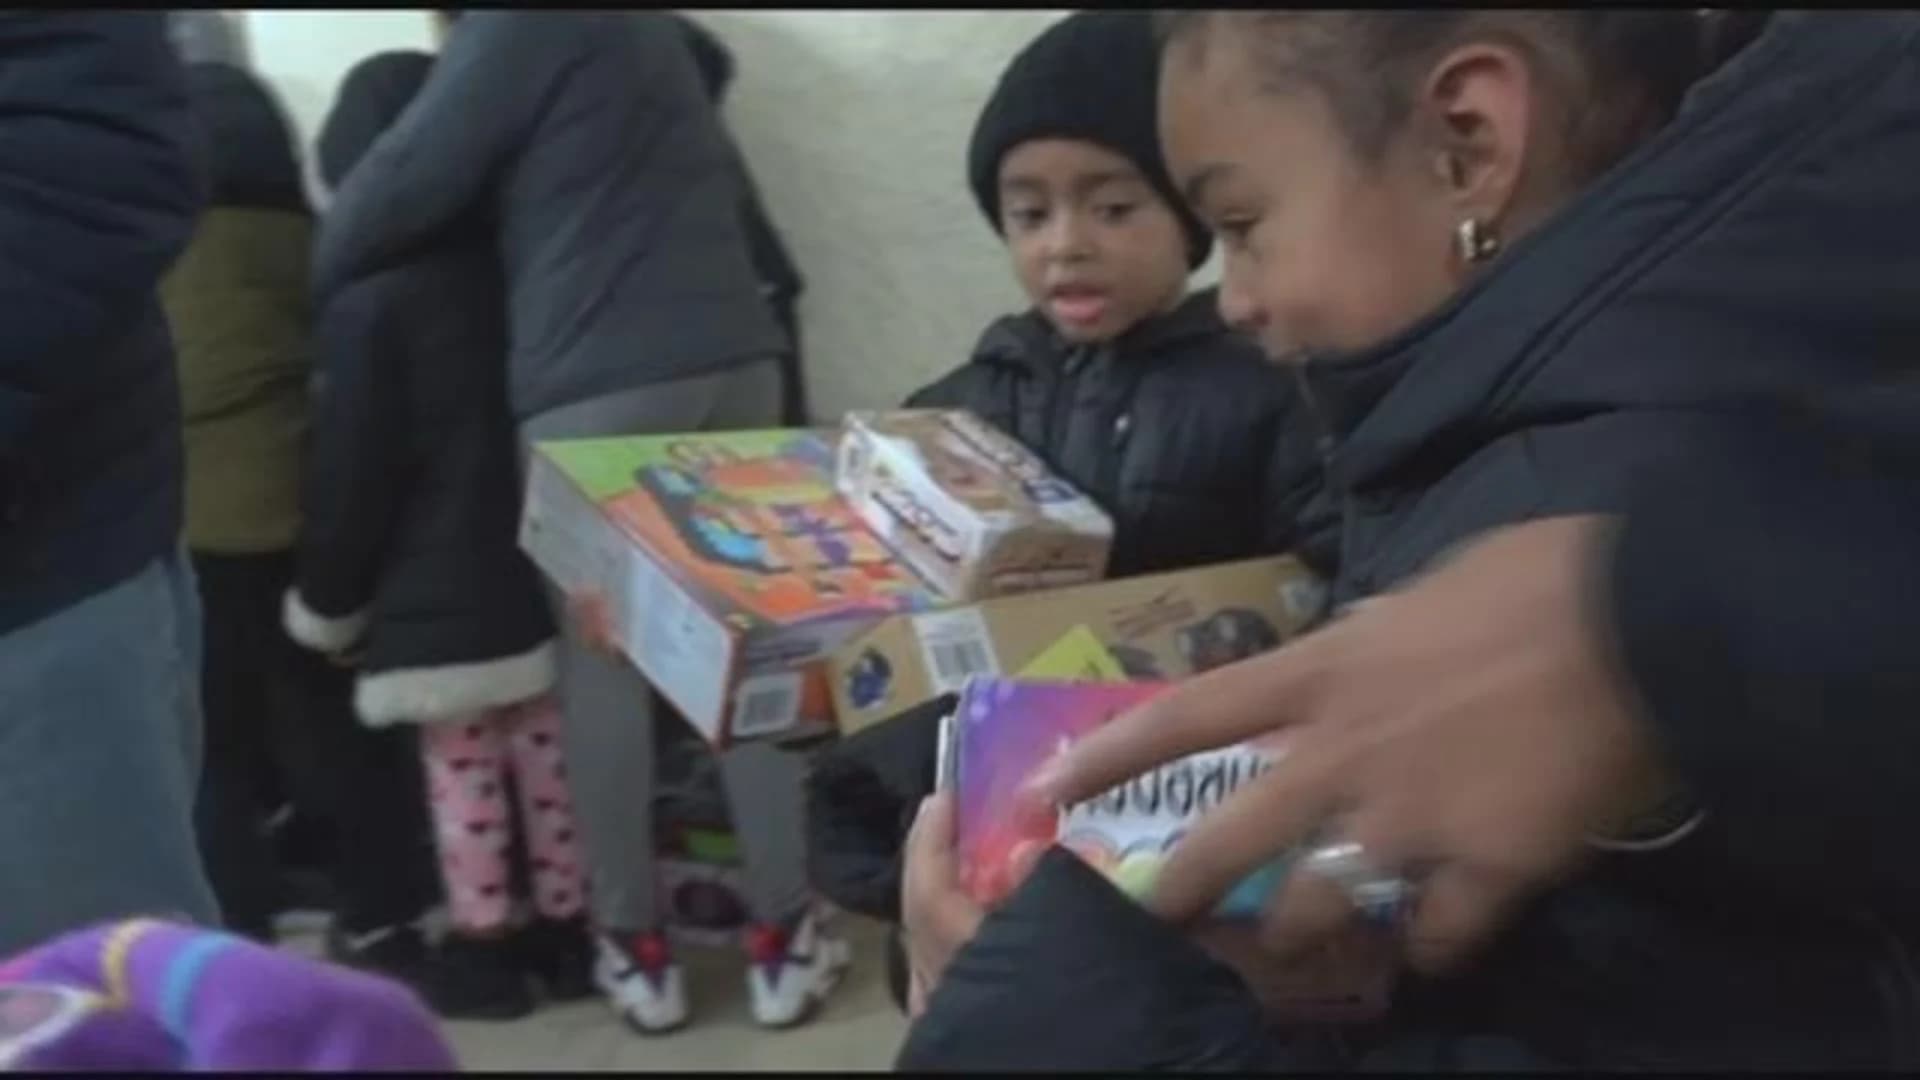 'Operation Realtors' Kids' gives back to Bronx families in need for 8th consecutive year